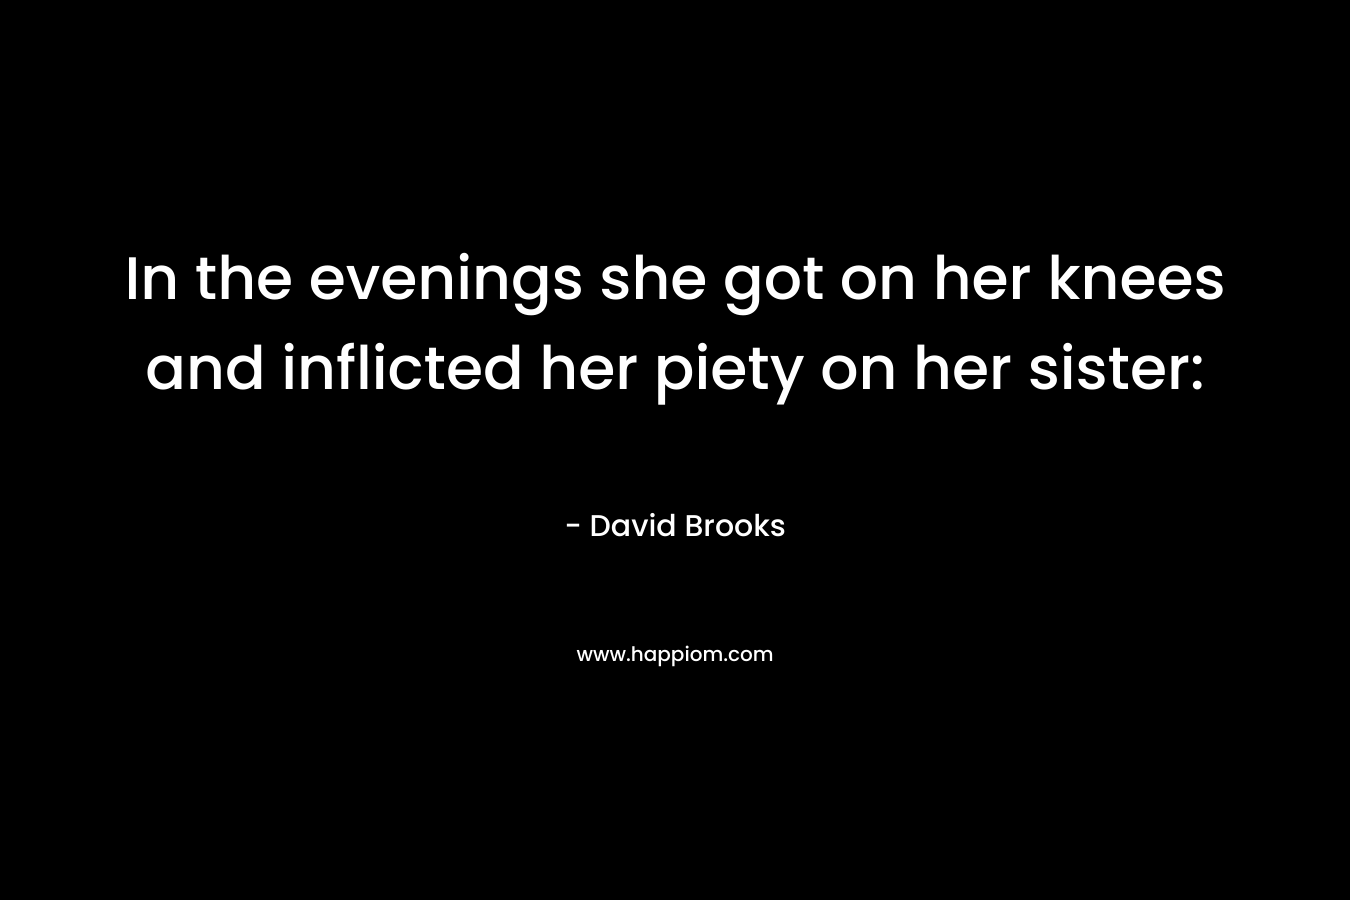 In the evenings she got on her knees and inflicted her piety on her sister: – David Brooks